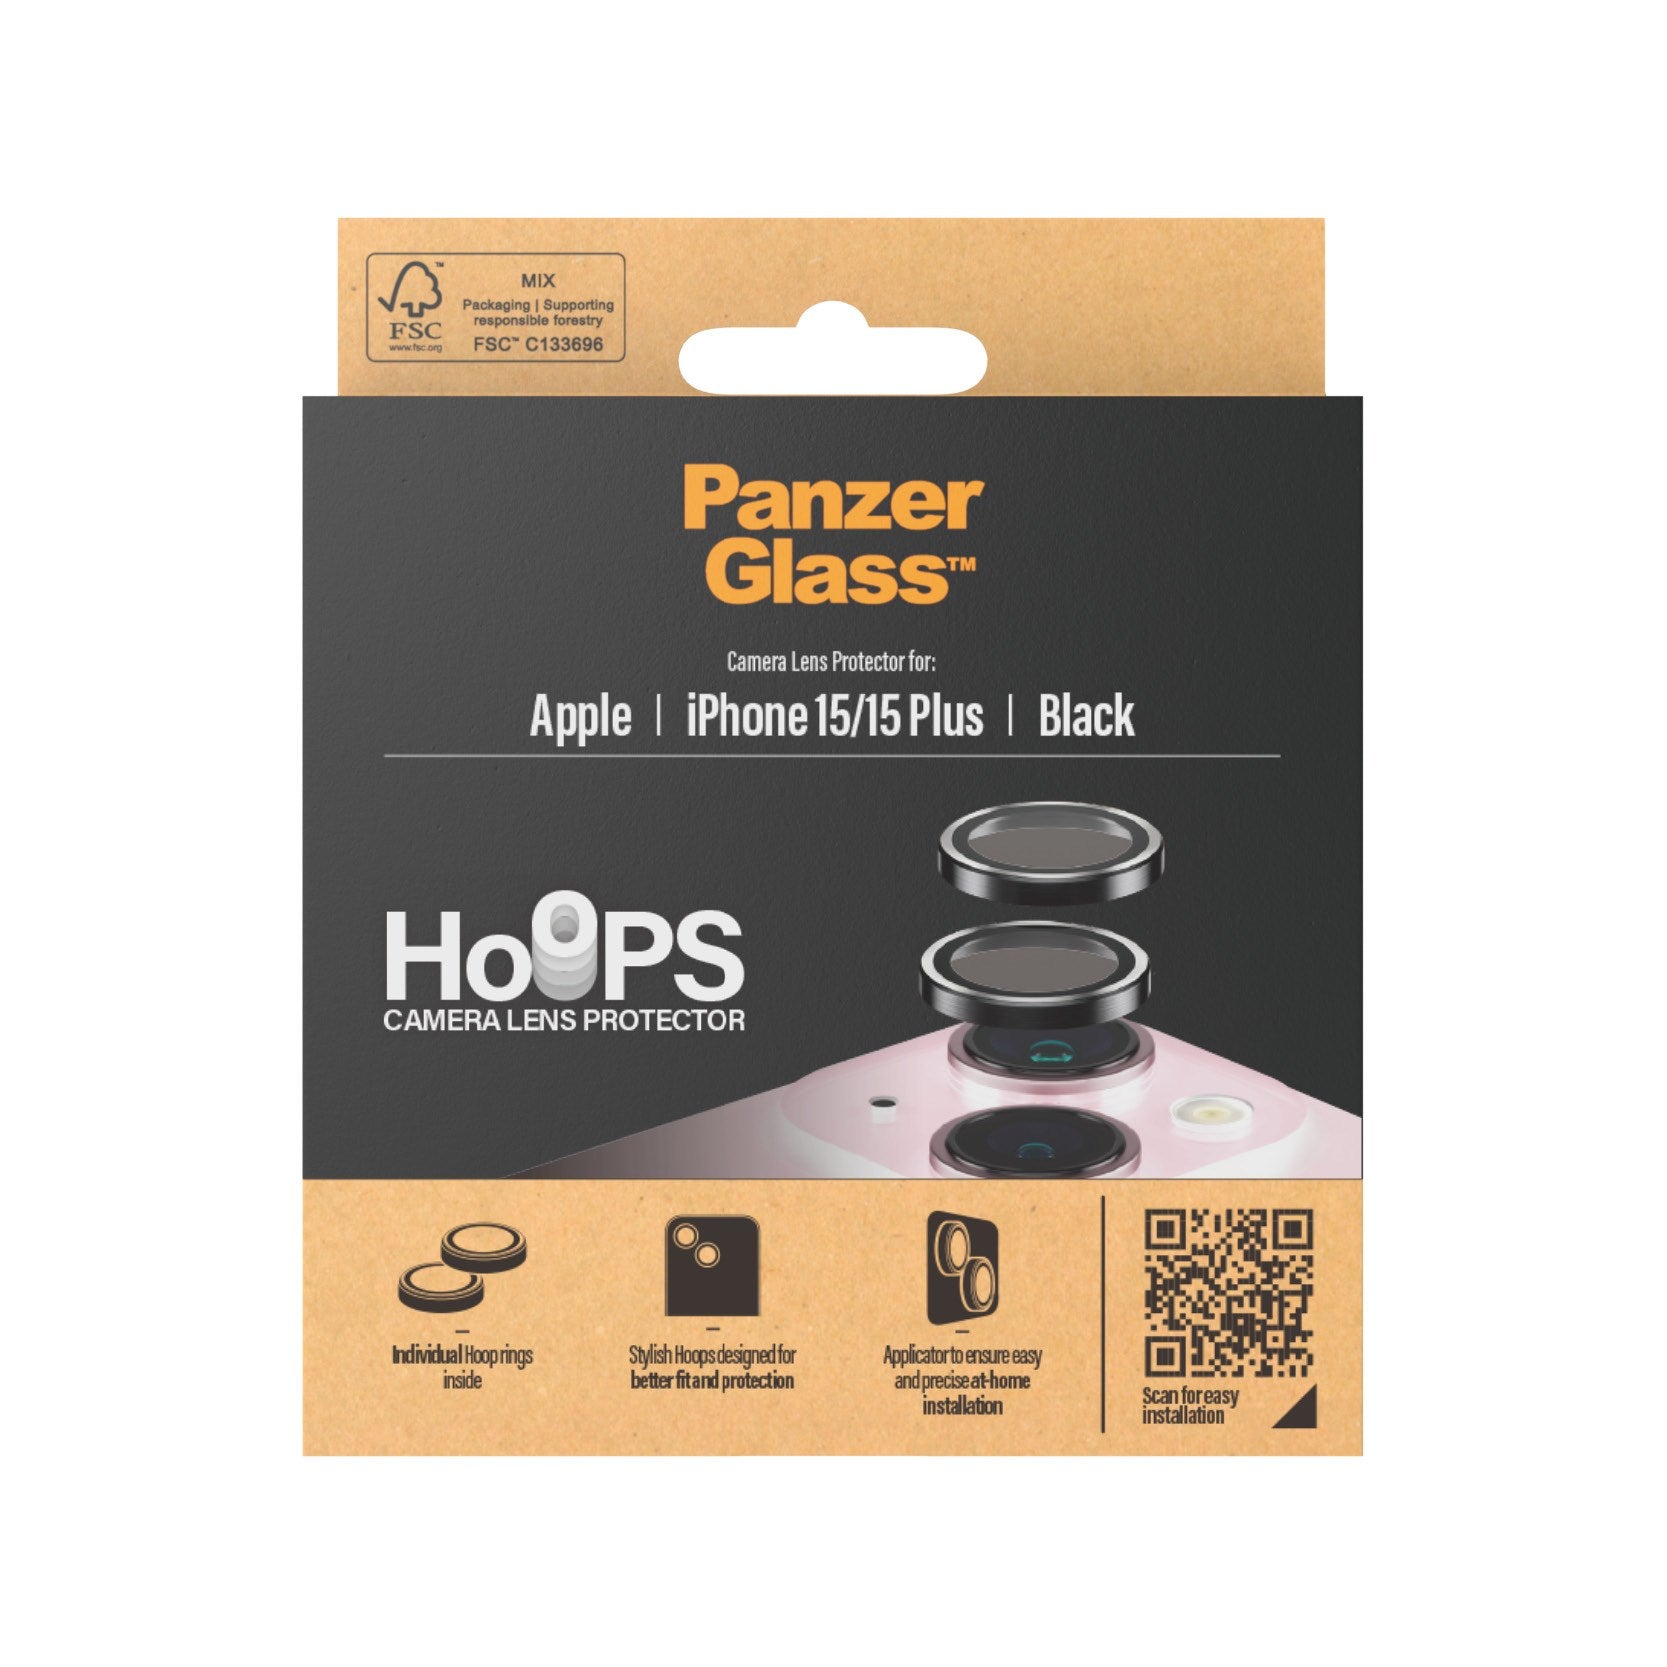 PanzerGlass™ Hoops for iPhone 15/15 Plus